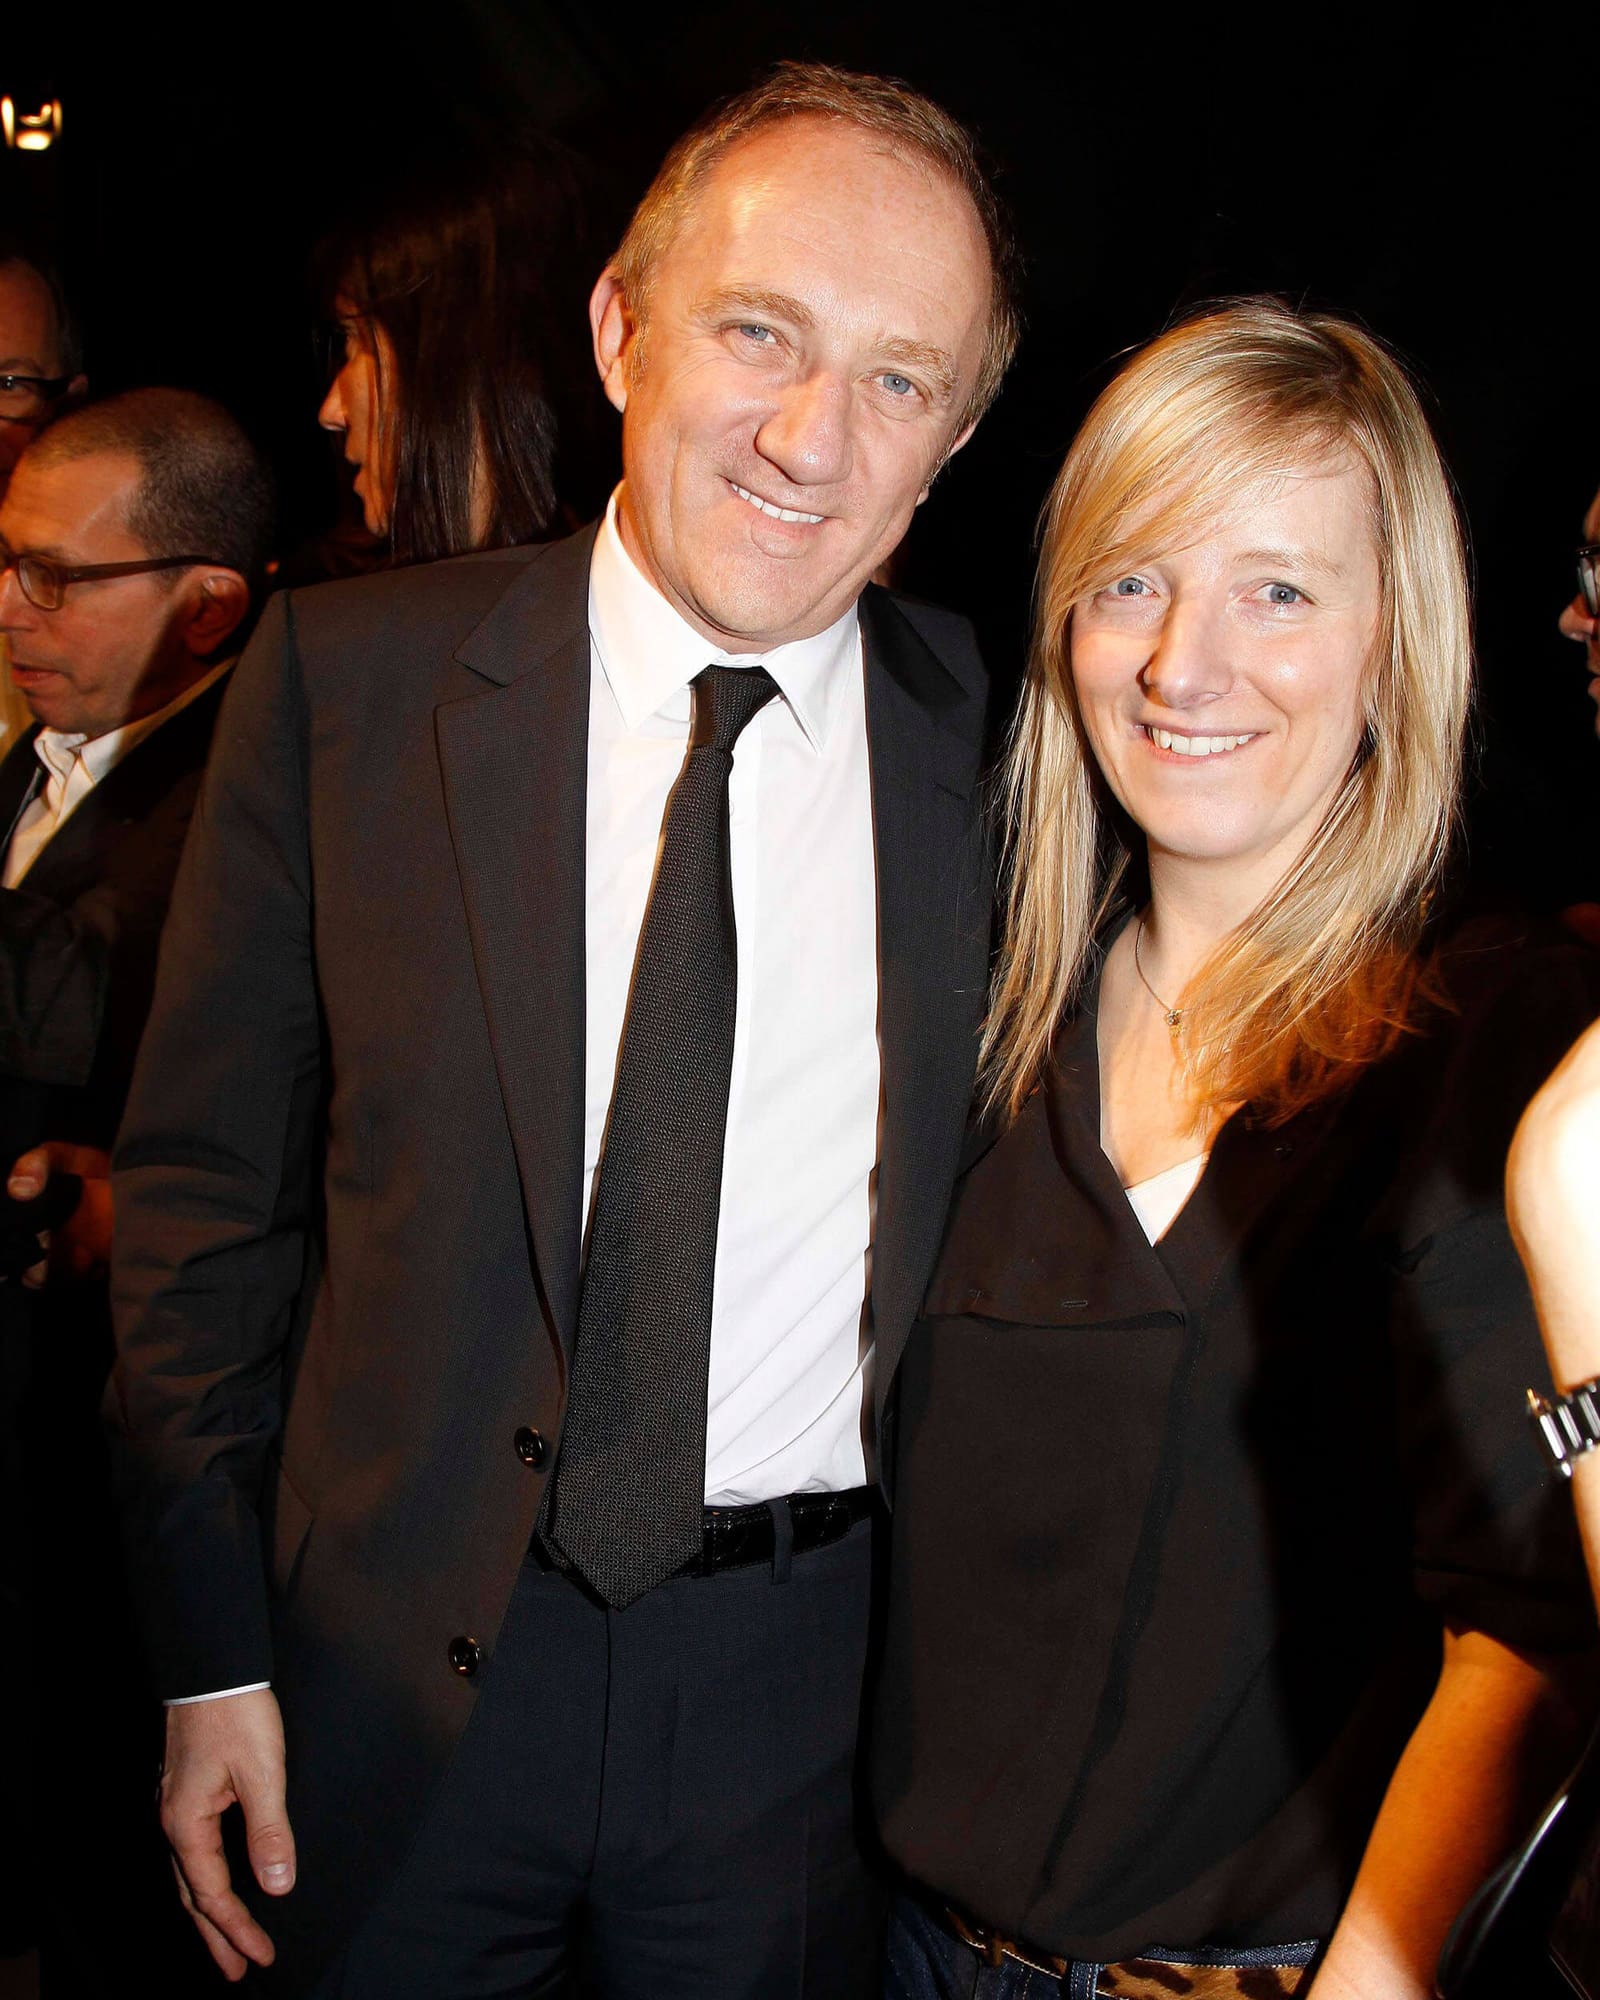 Sarah Burton and Alexander McQueen to Part Ways After More Than Two Decades